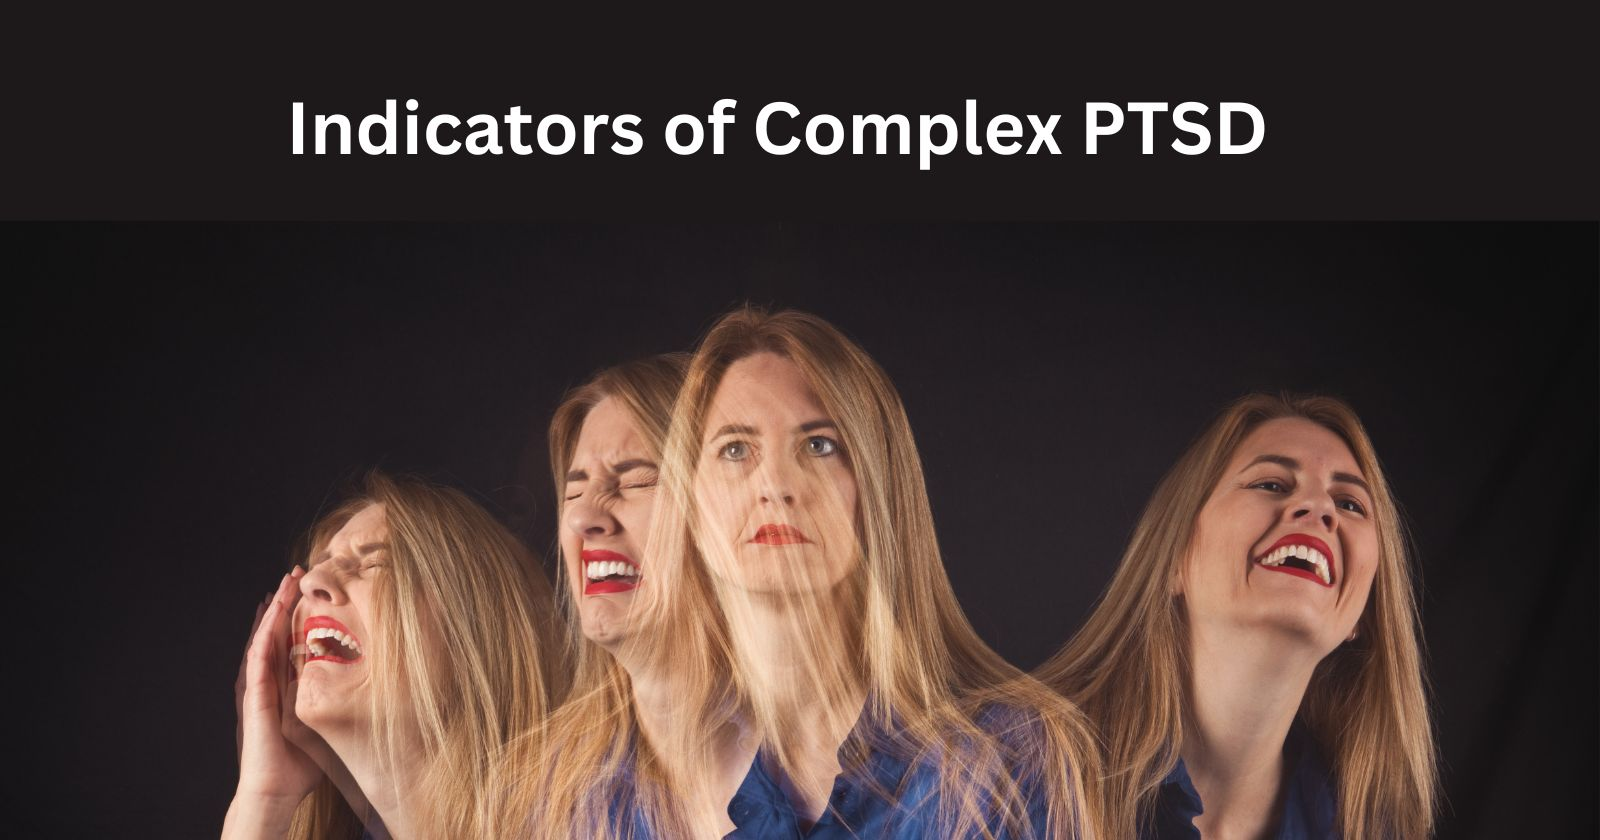 Symptoms of Complex PTSD

Female picture with 4 emotions